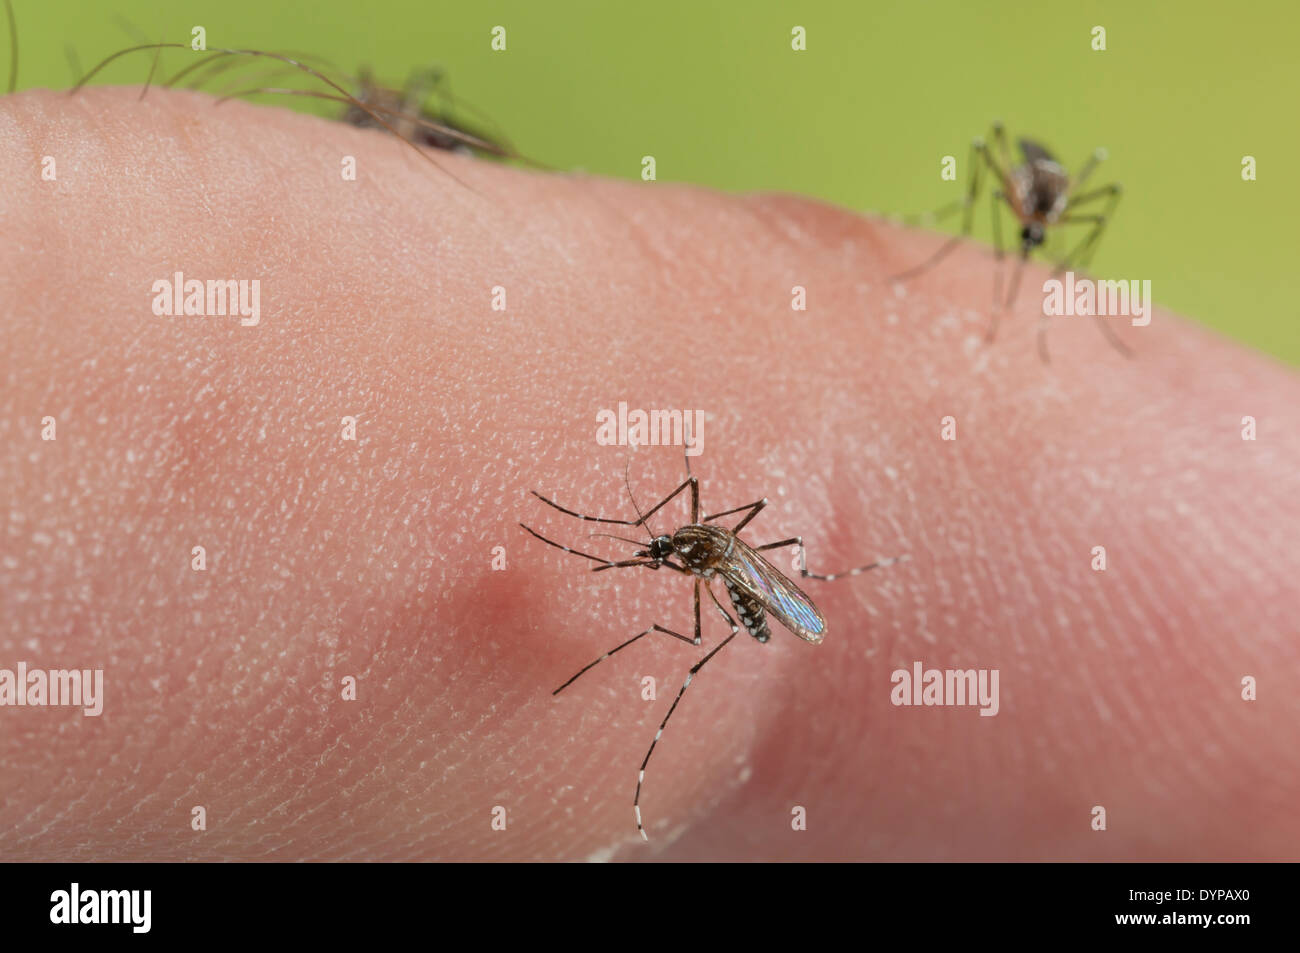 Biting on human skin in order to collect blood necessary for making an eggbatch, transmitting diseases such as Dengue or Yellow Fever in this act. Stock Photo